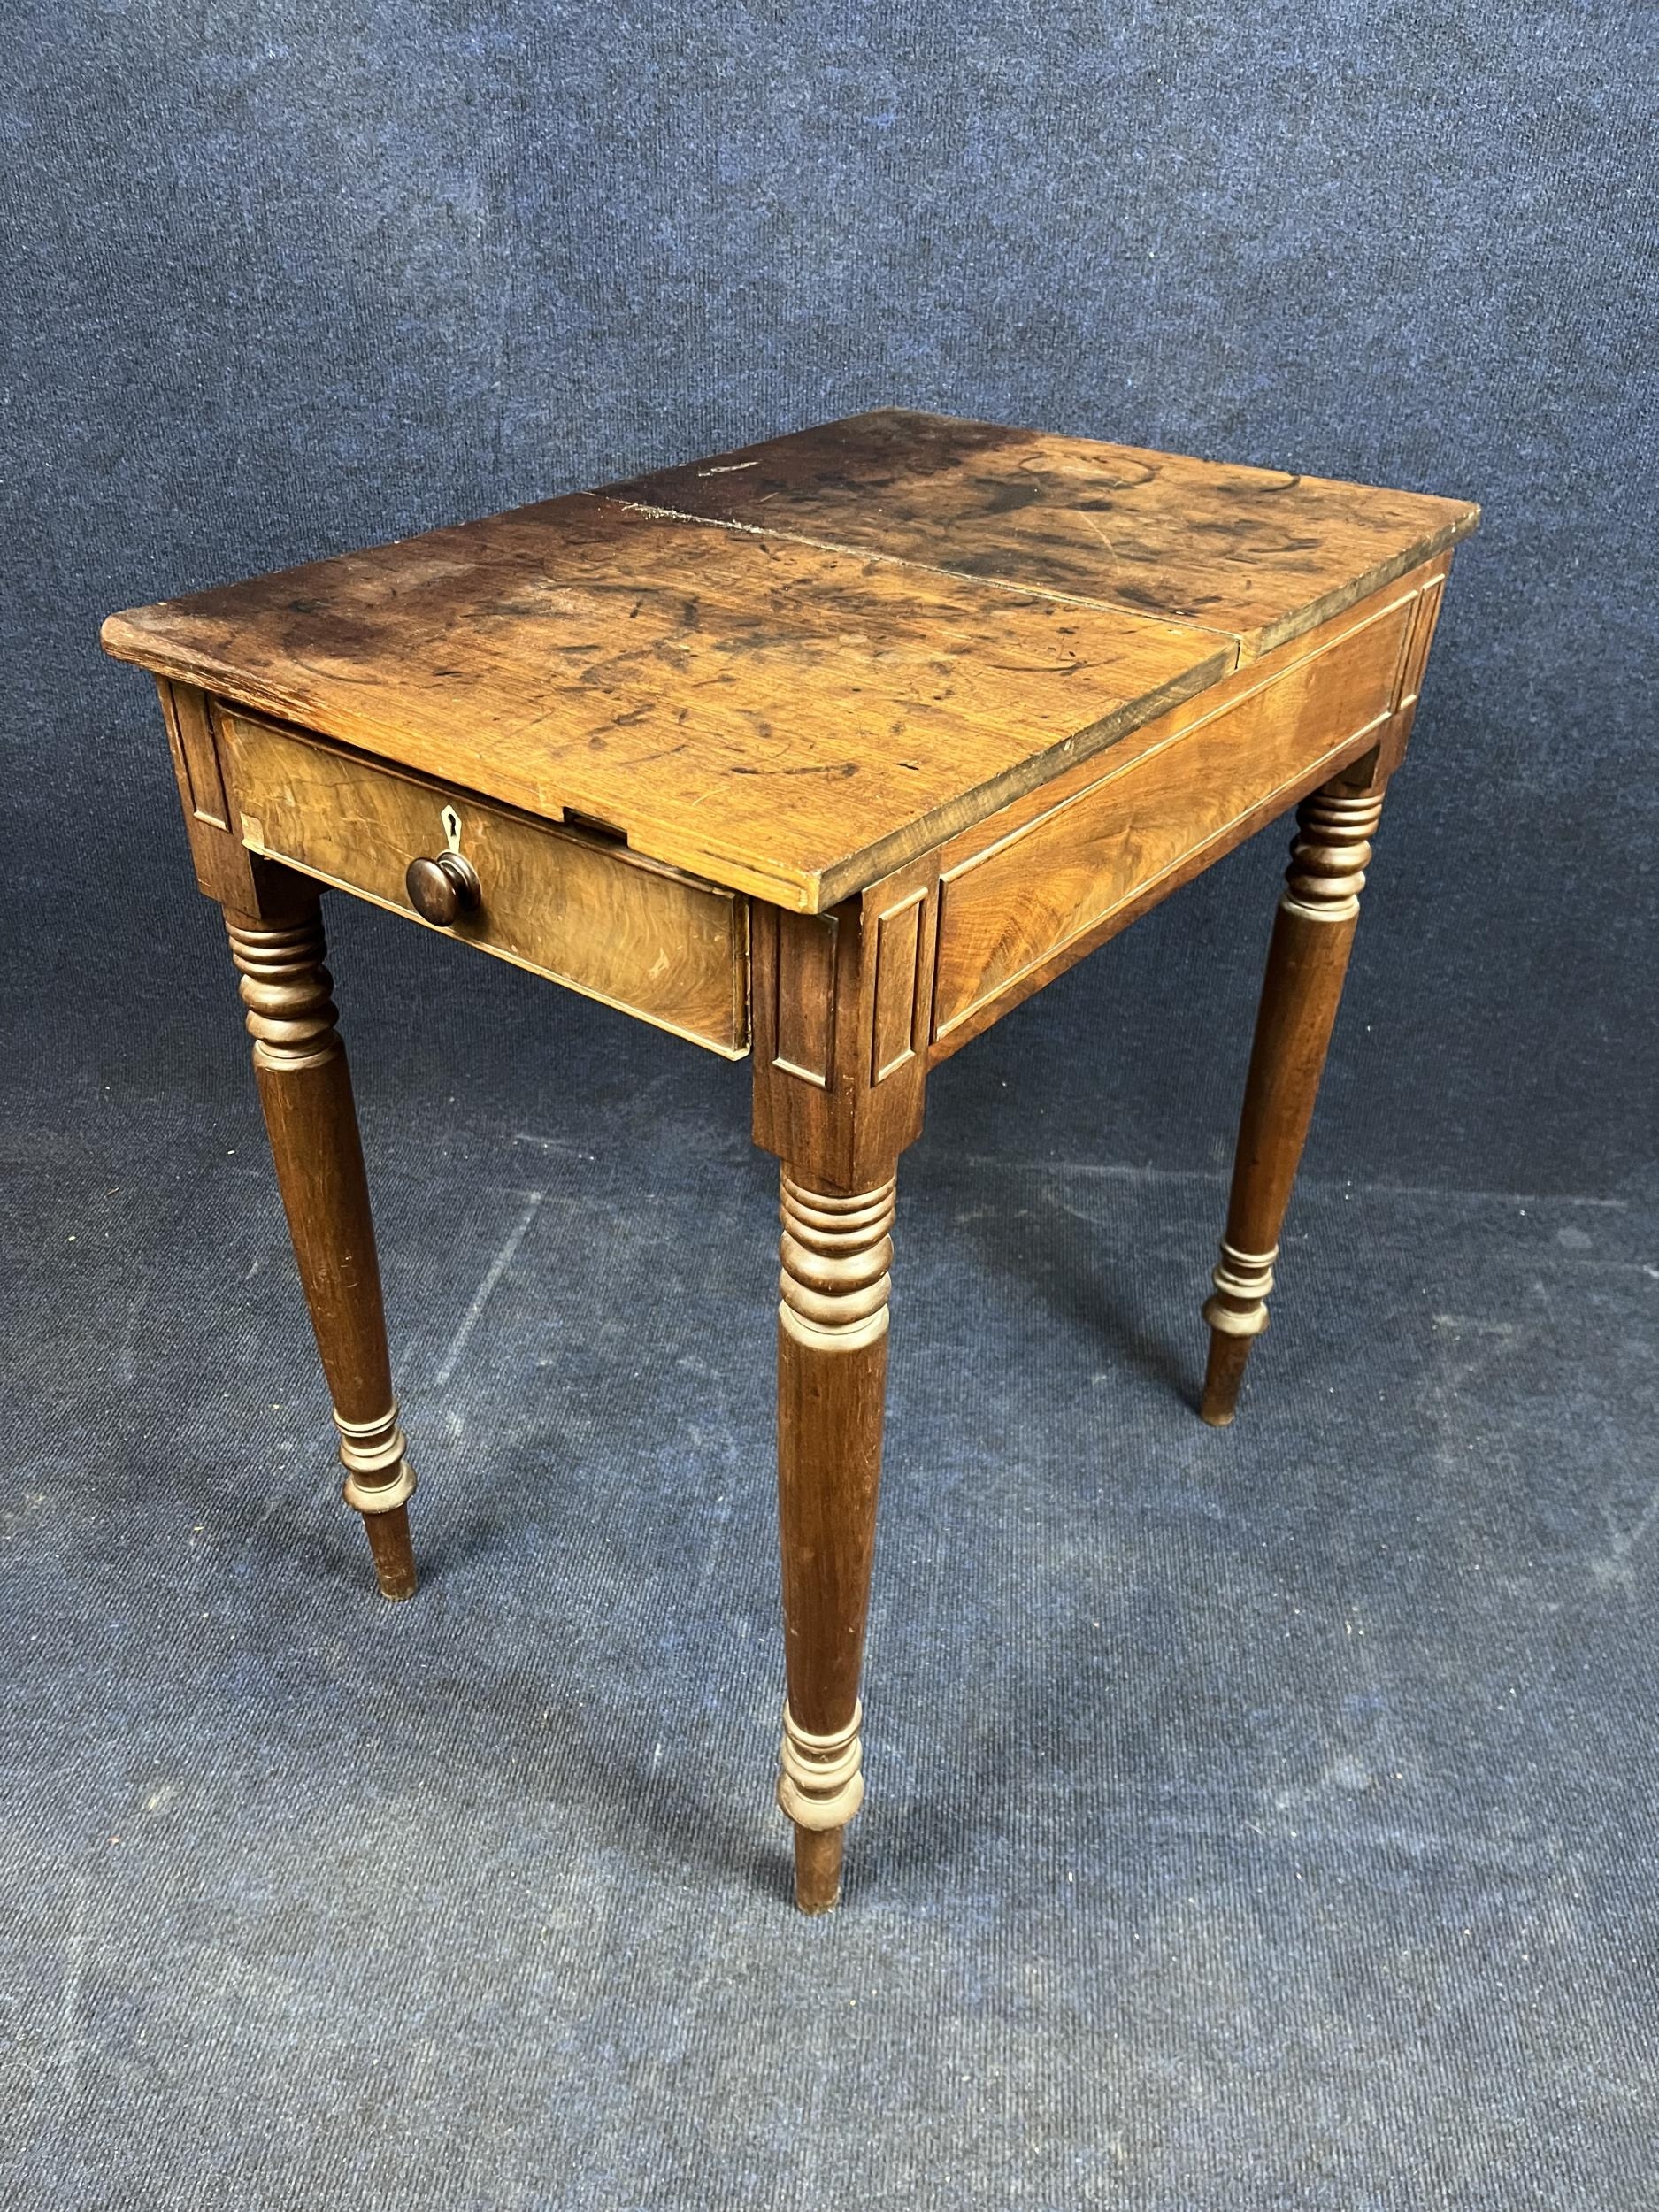 A 19th century mahogany side table. H.72 W.65 D.42.cm - Image 4 of 6